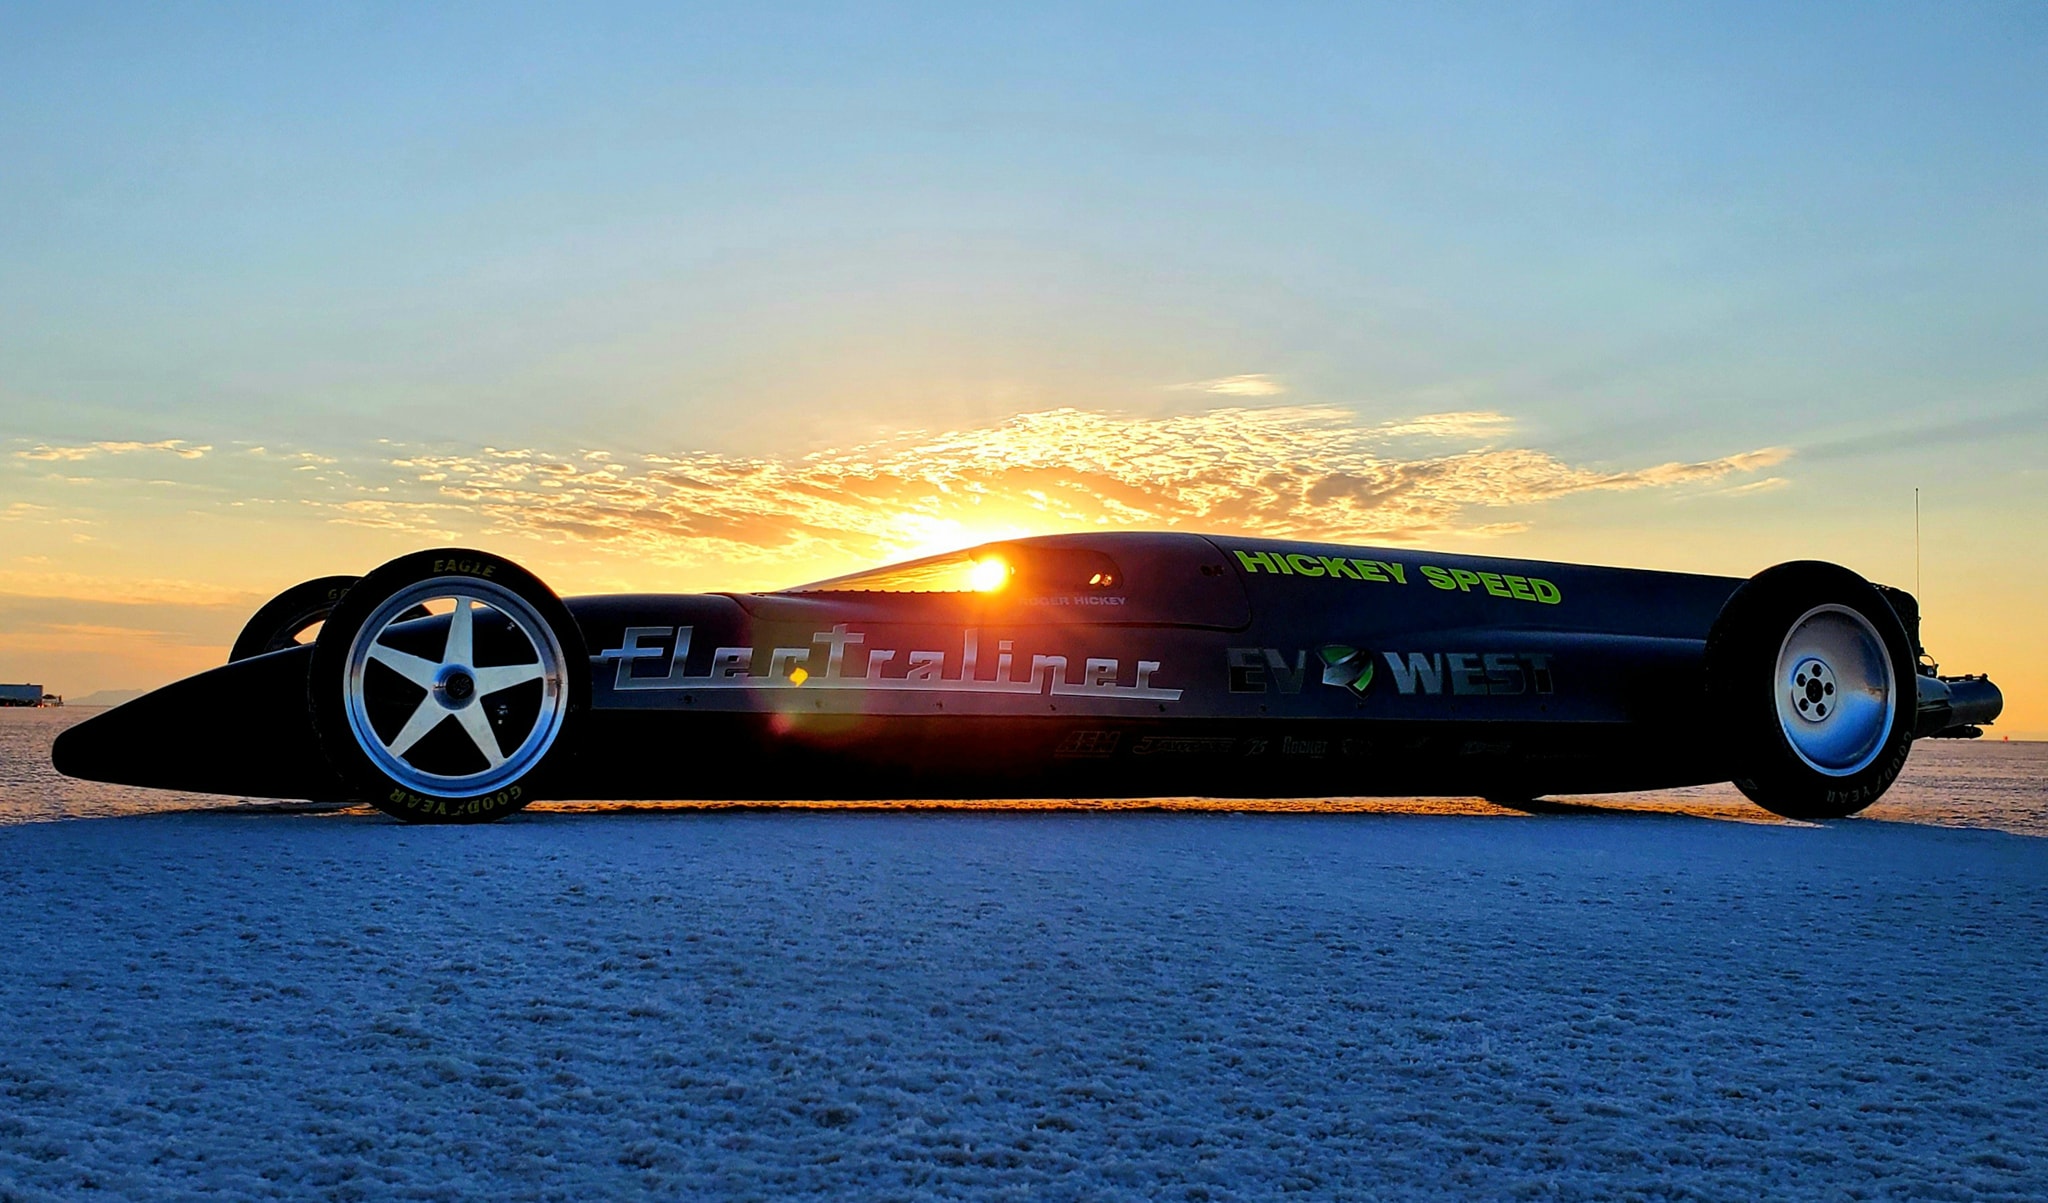 23yearold electric land speed record broken at Bonneville by a car